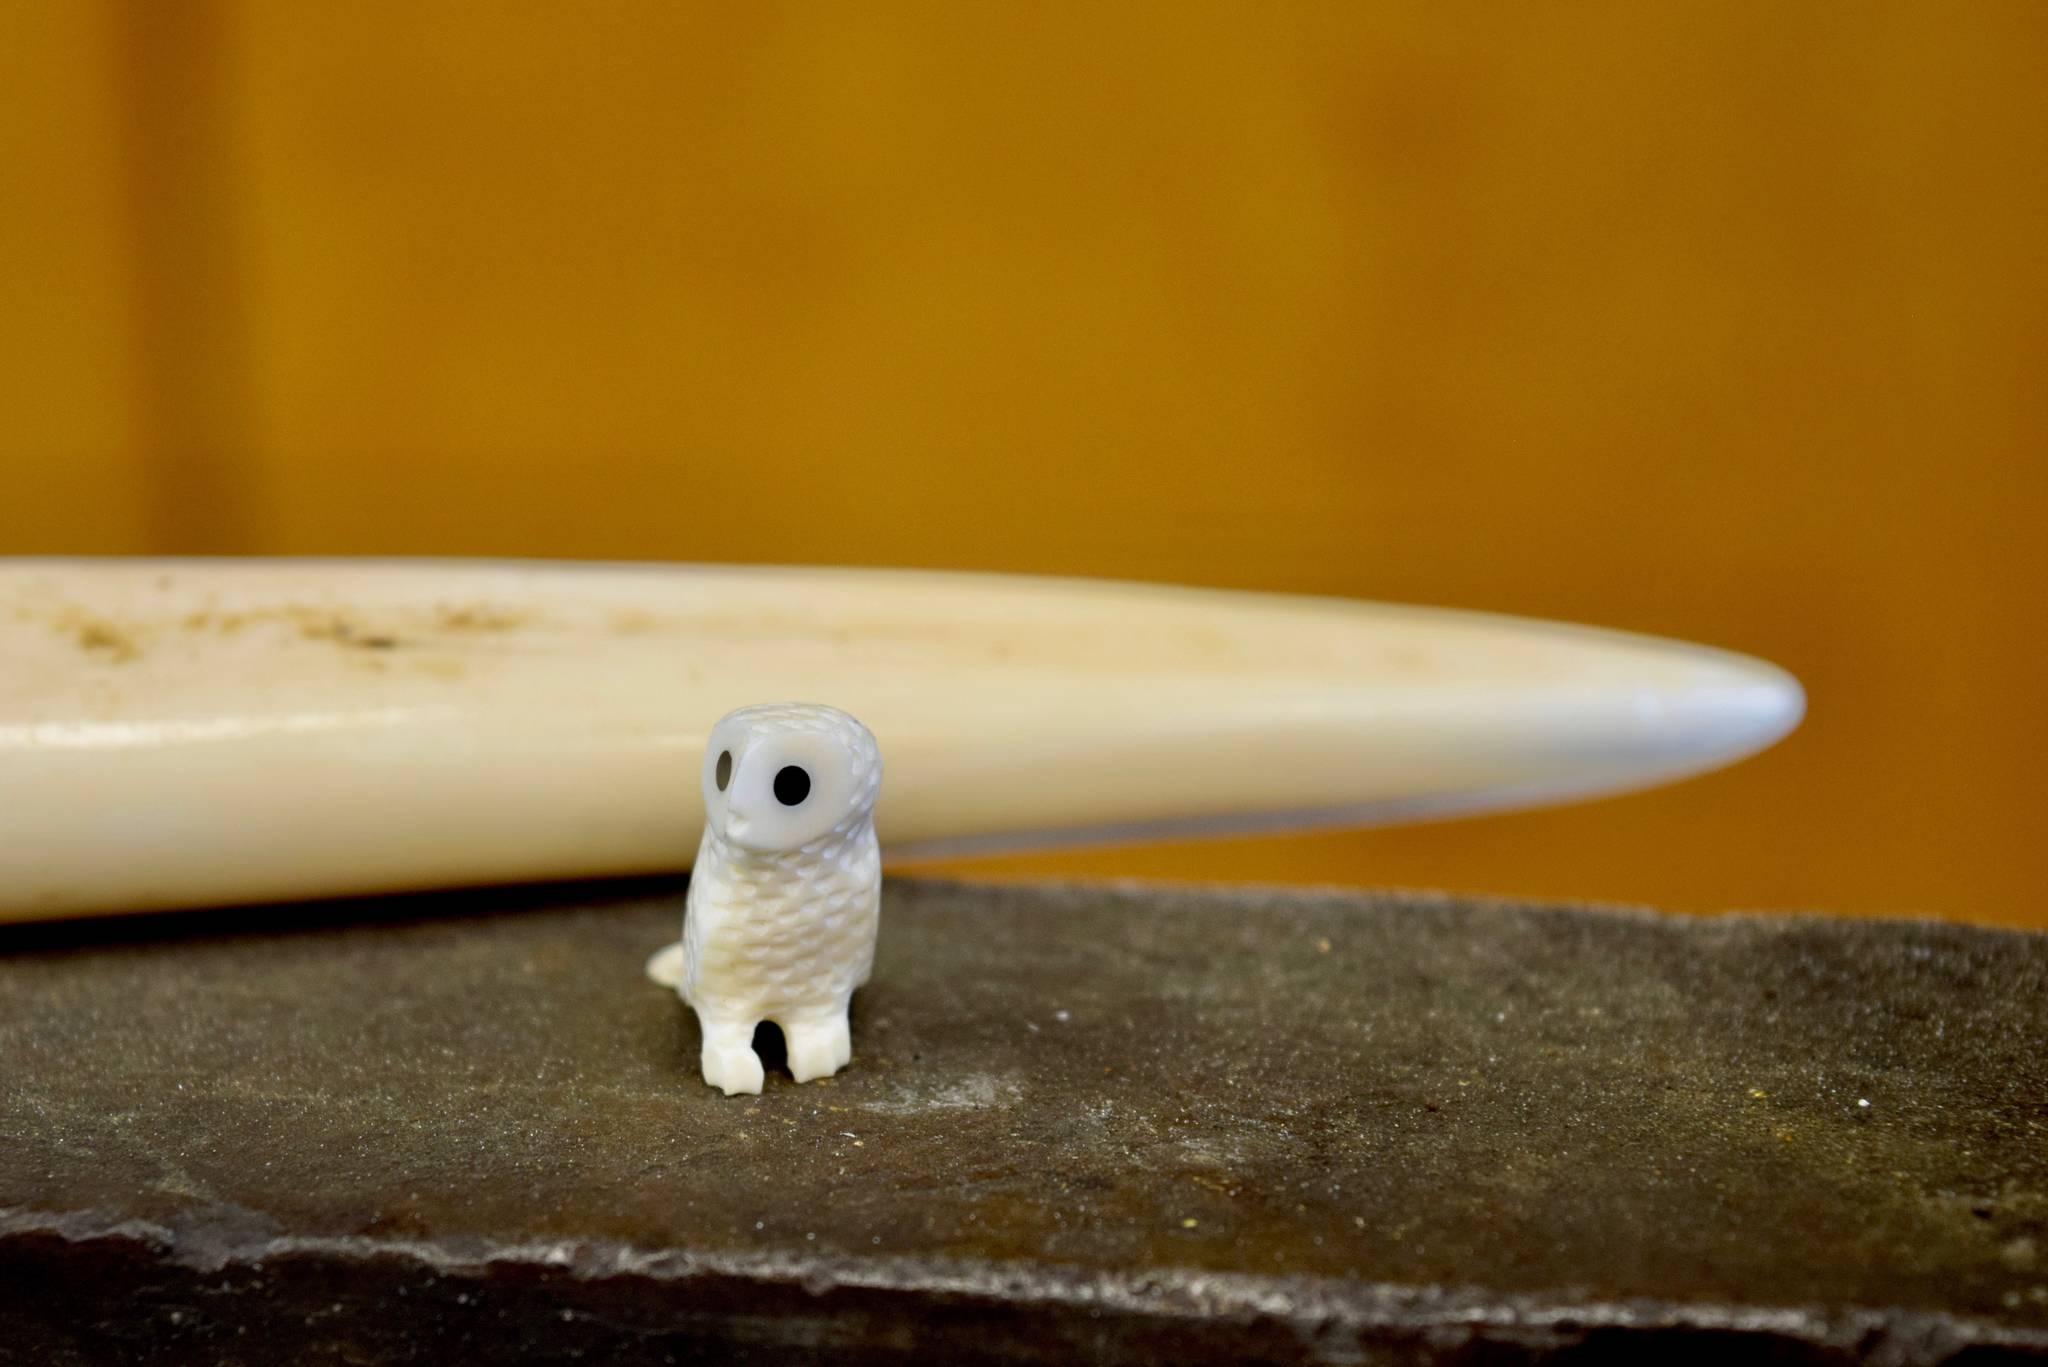 An ivory owl figurine made by Sam Schimmel is used as an example during his ivory carving demonstration at the first workshop of the Kenai National Wildlife Refuge’s cultural heritage series on Friday, July 6, at the Kenai National Wildlife Refuge Visitors Center, near Soldotna, Alaska. (Photo by Victoria Petersen/Peninsula Clarion)